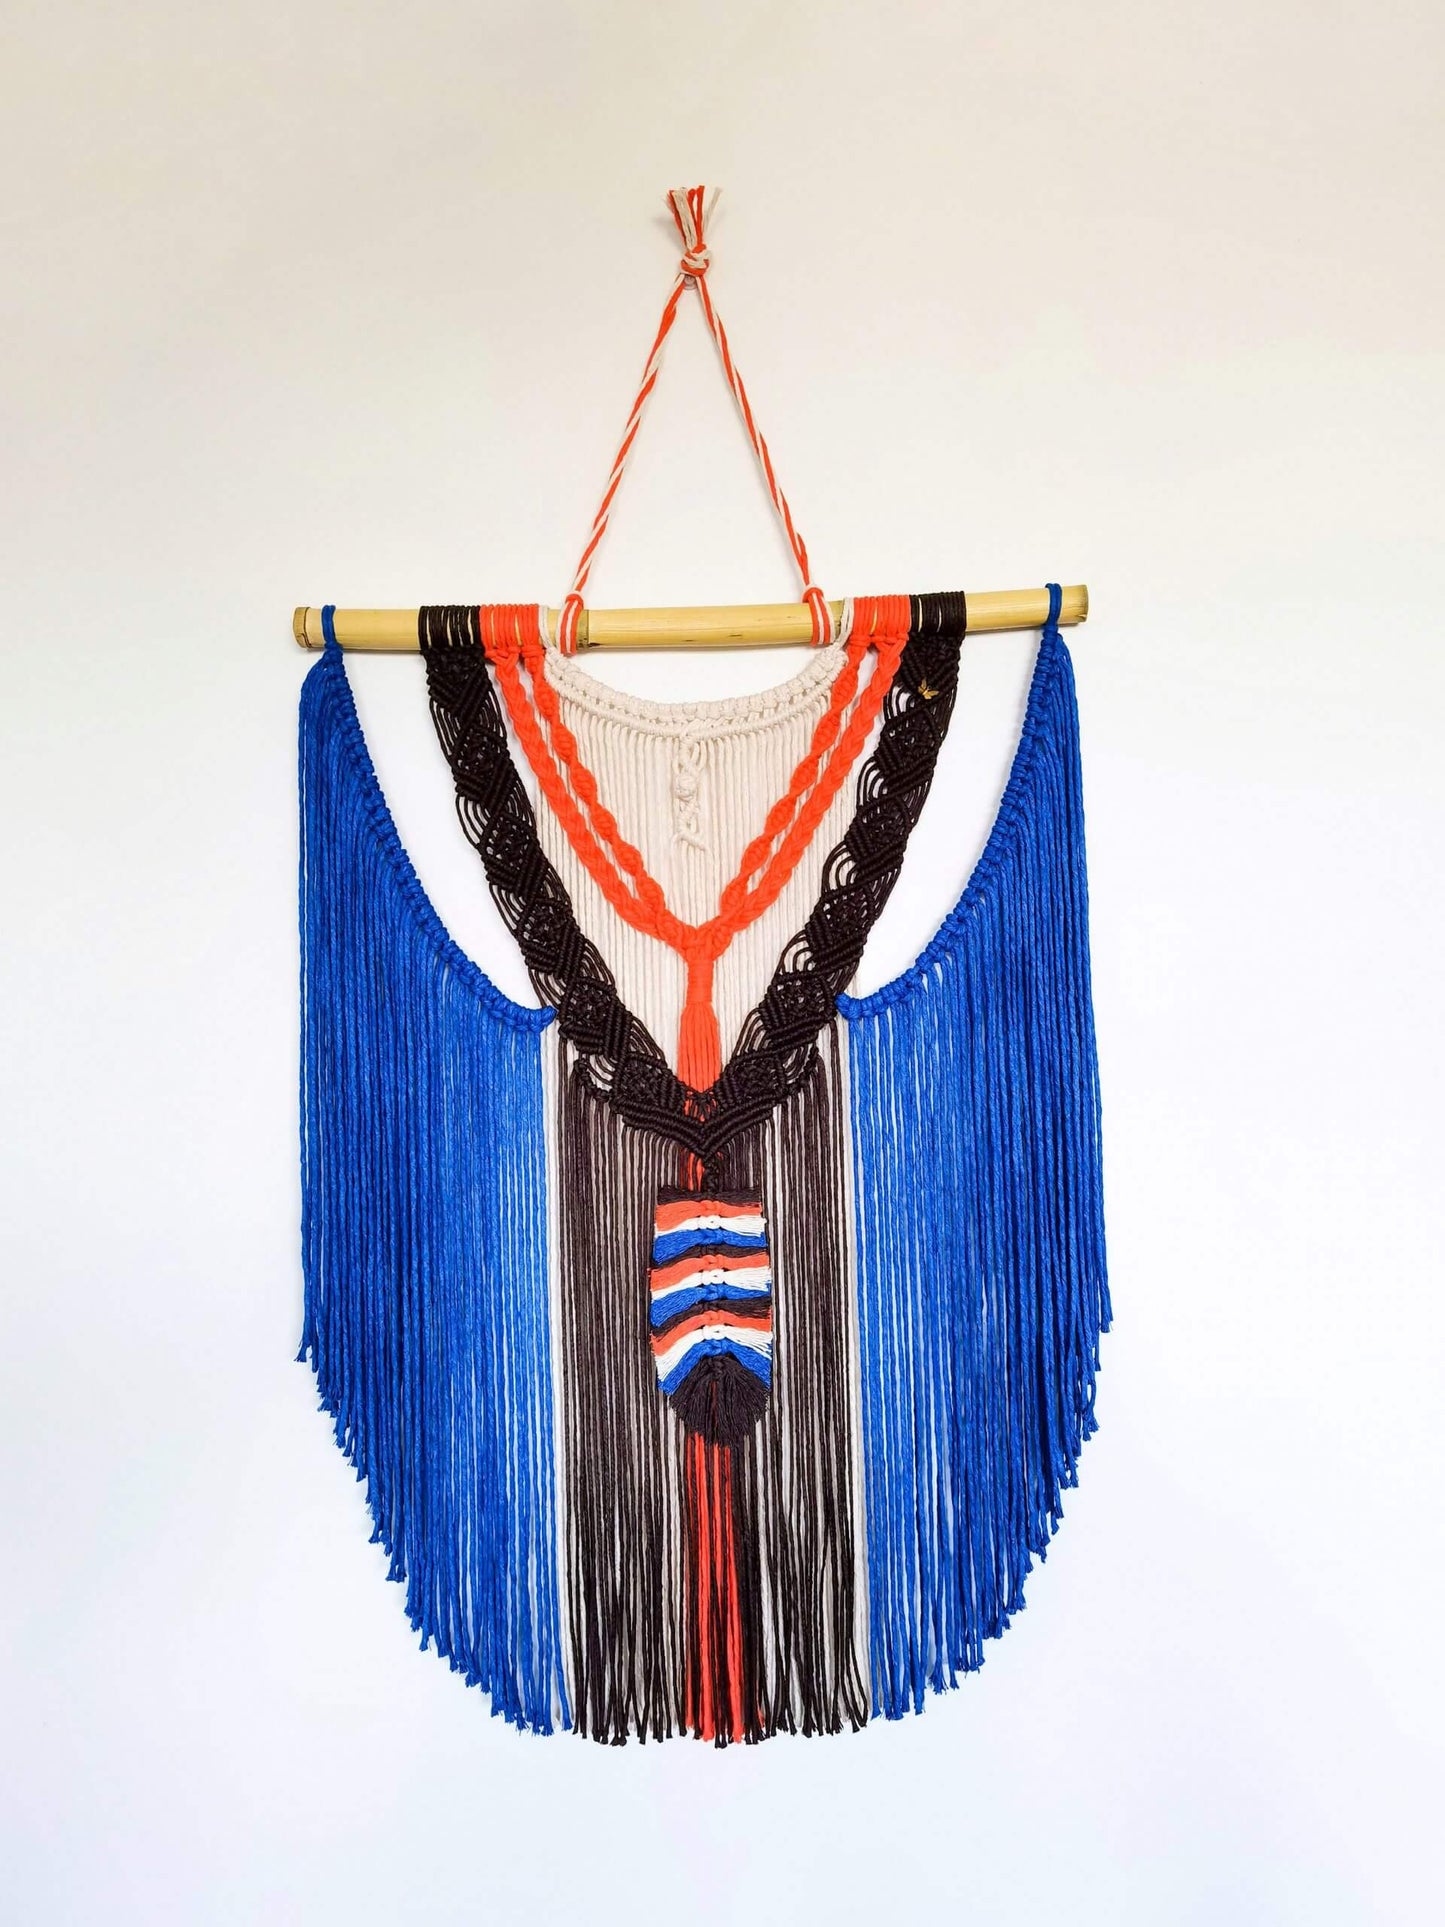 Blue and black macrame wall hanging